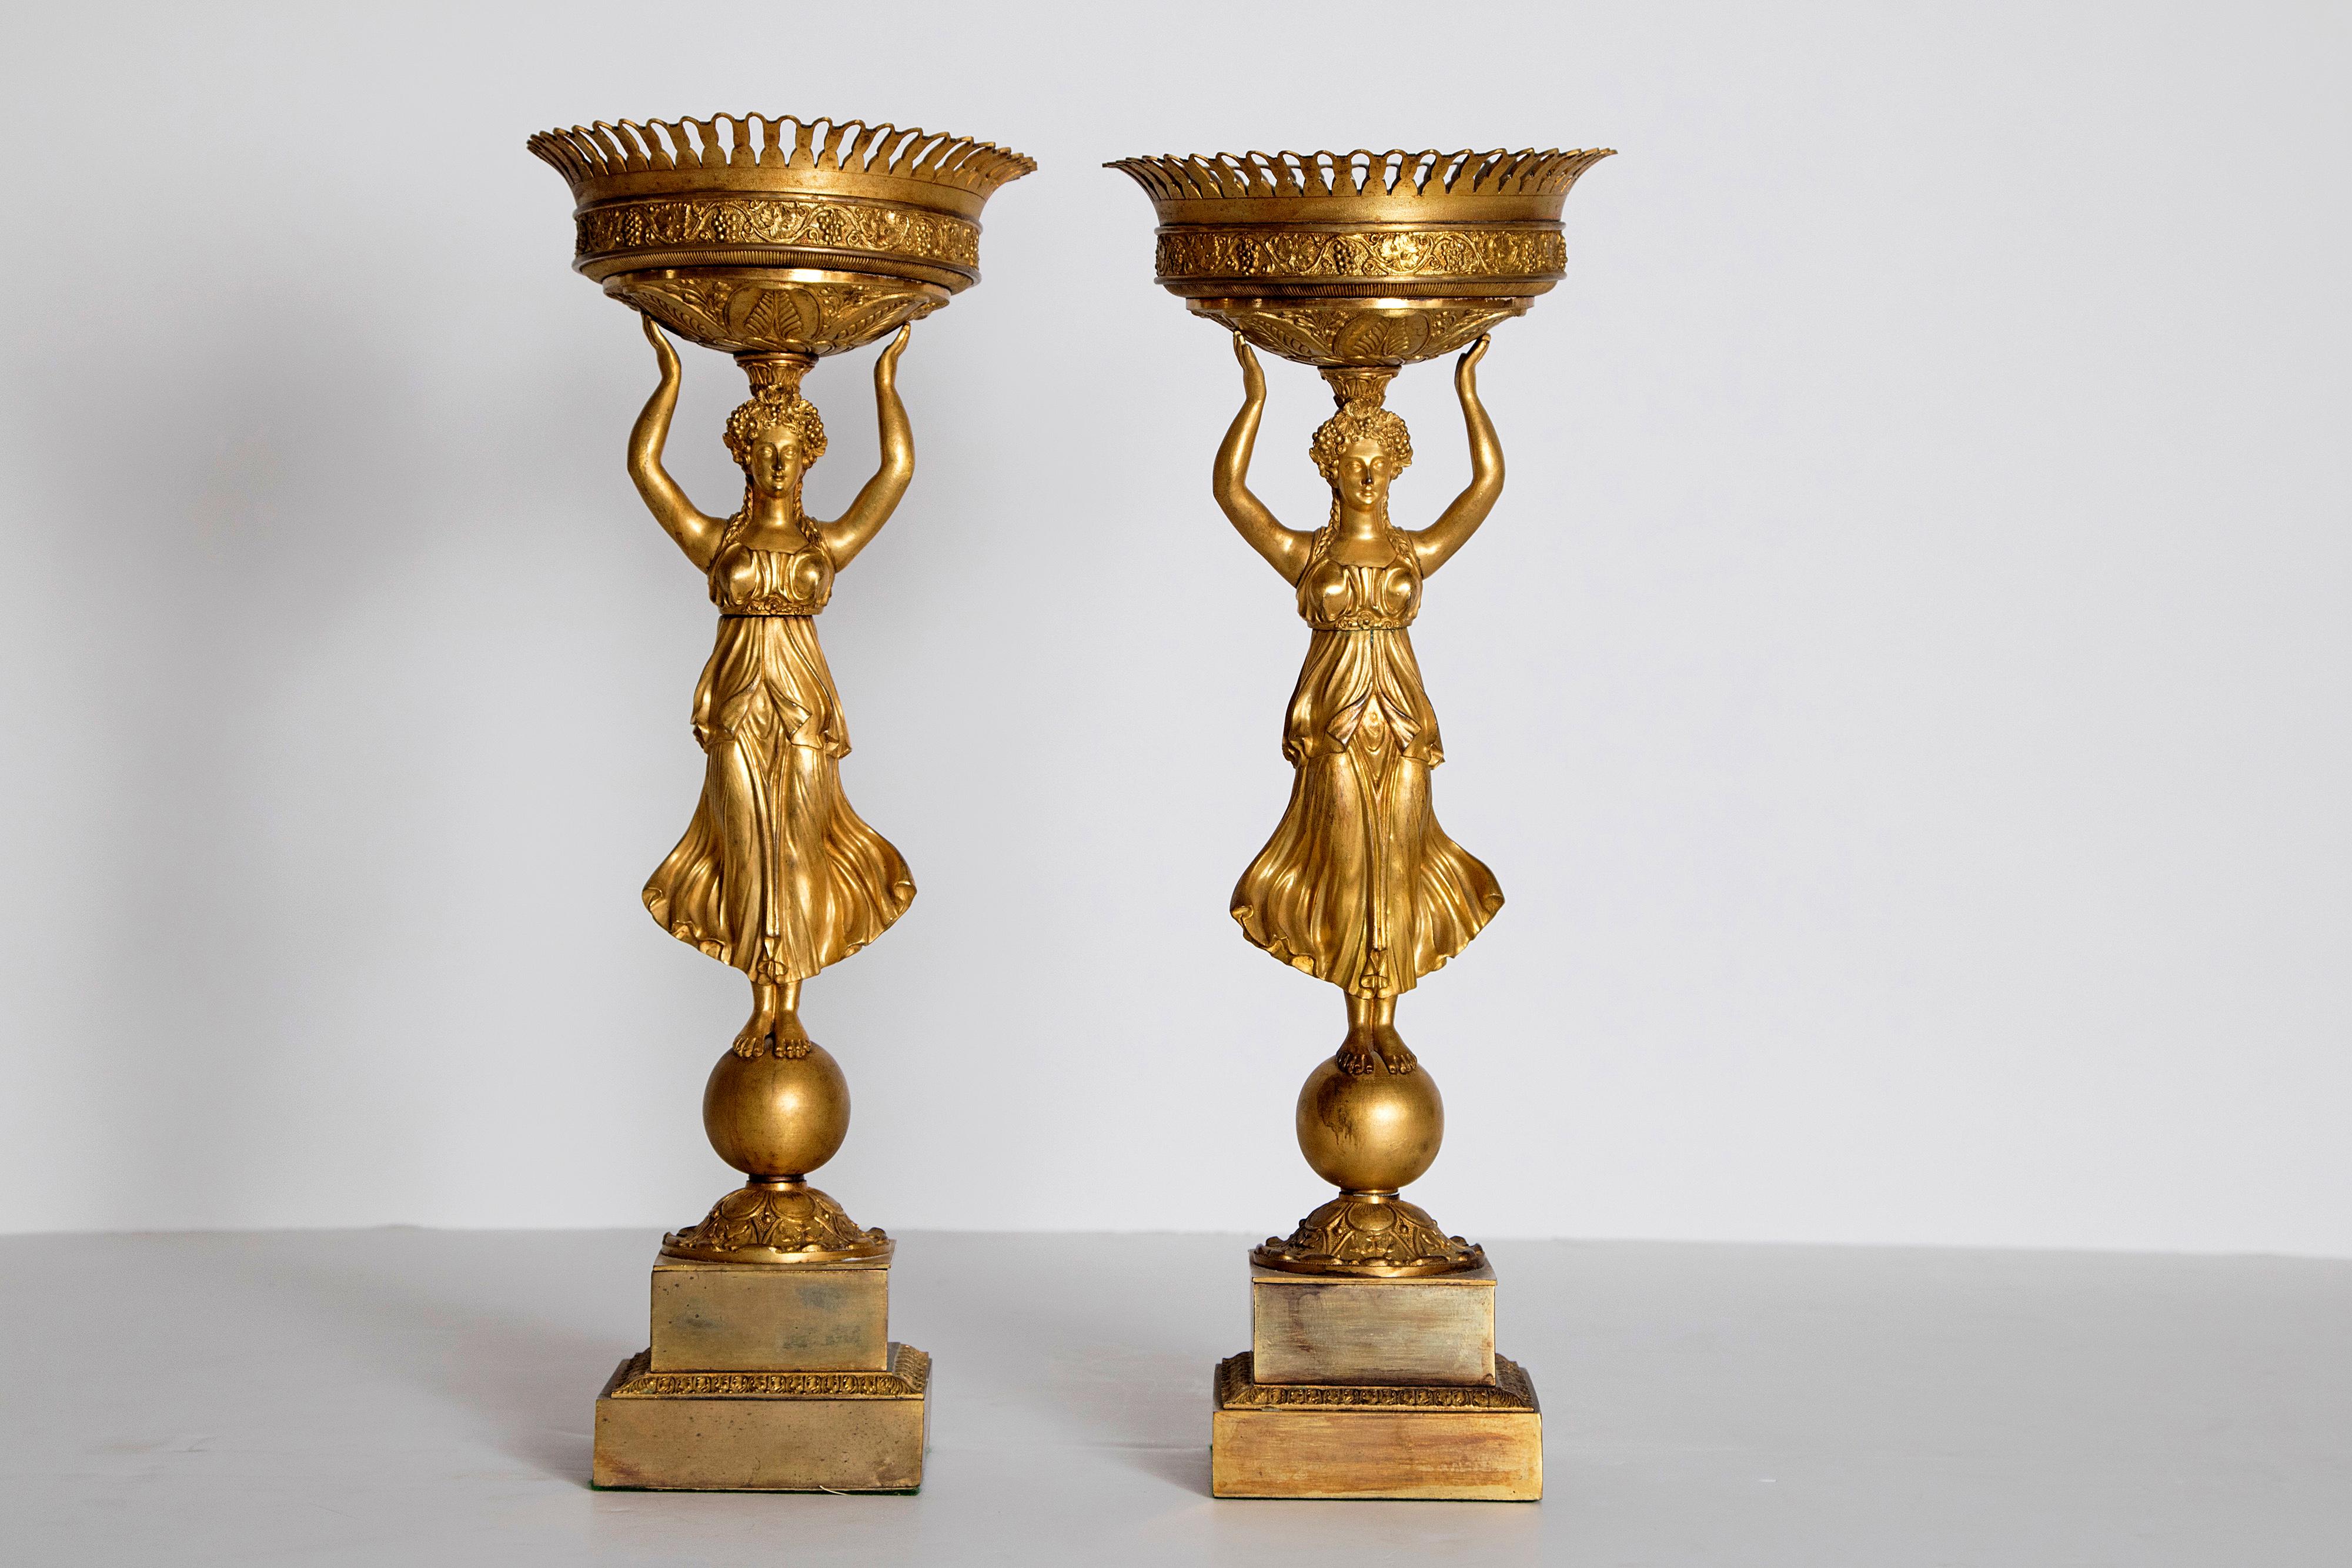 A pair of Empire gilt bronze centerpiece figures of classical women holding a basket aloft with a foliage design and filigree rim. They are standing on an orb above two tiered square bases. The baskets are missing original interior glass liners.